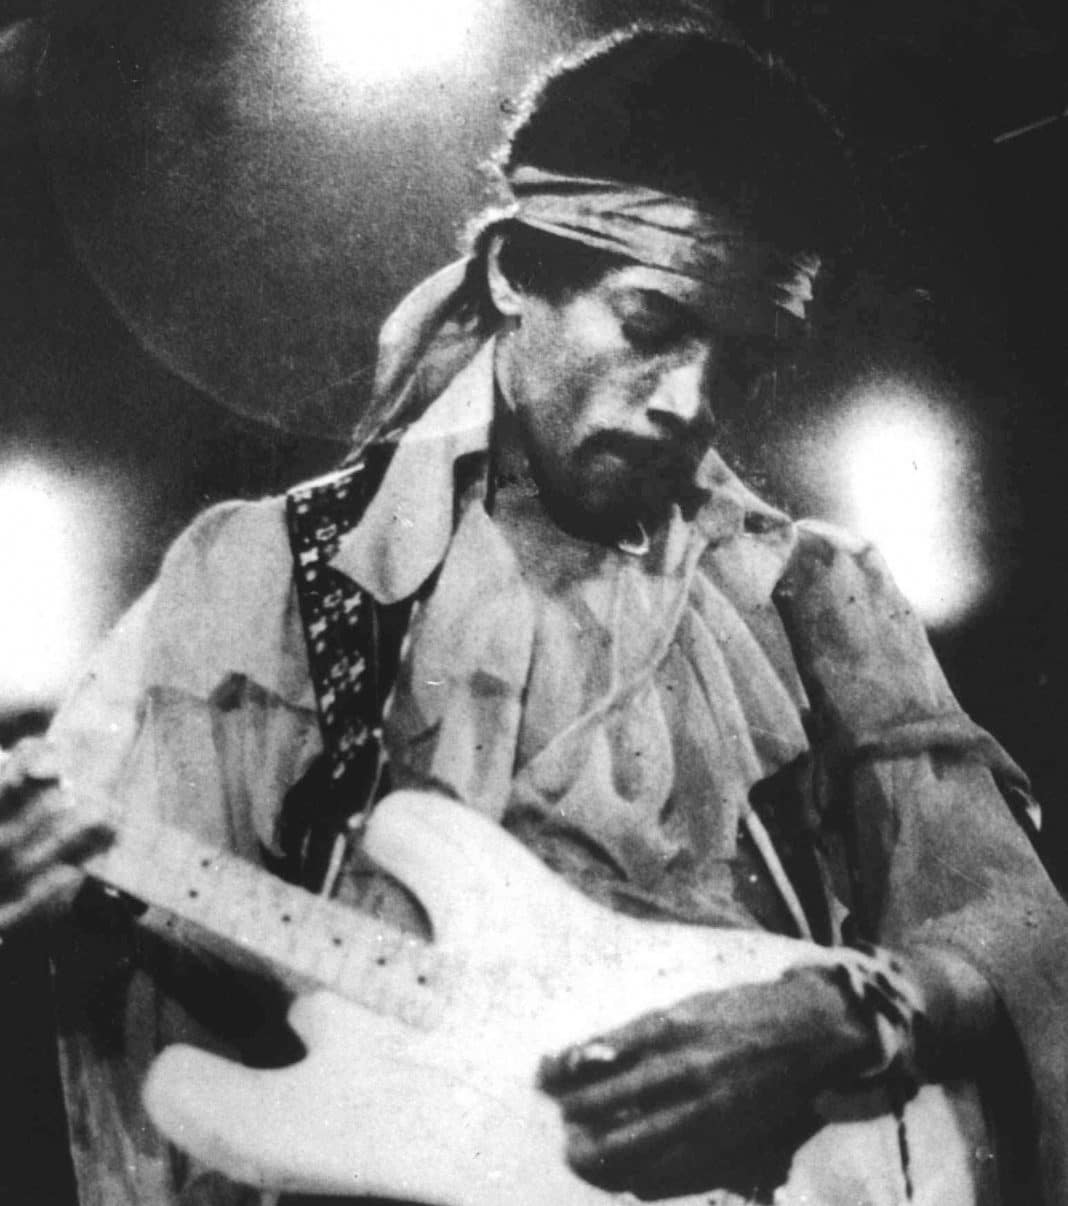 New York Residents Seek to Co-Name Street After Jimi Hendrix